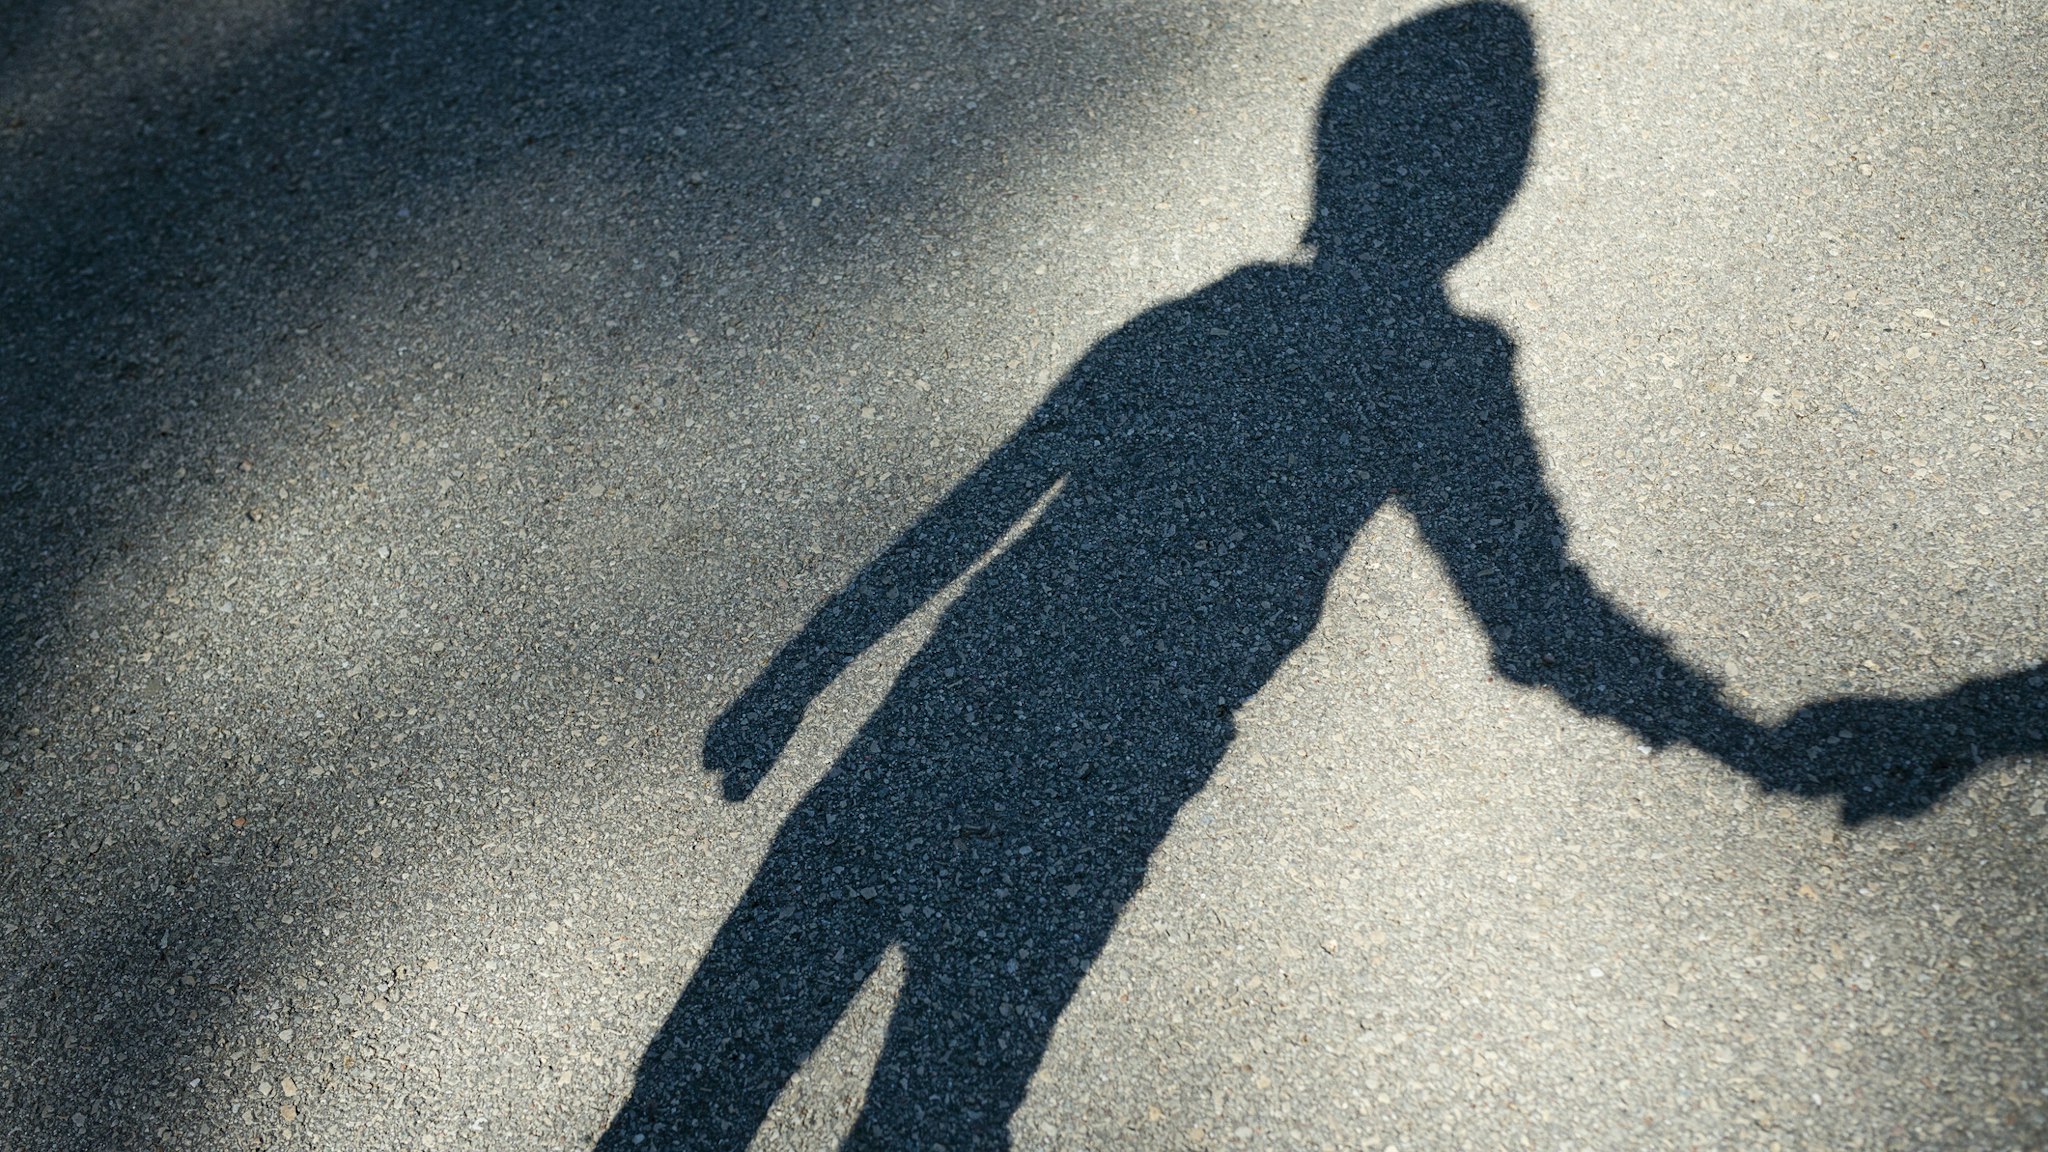 Shadow of a boy - stock photo